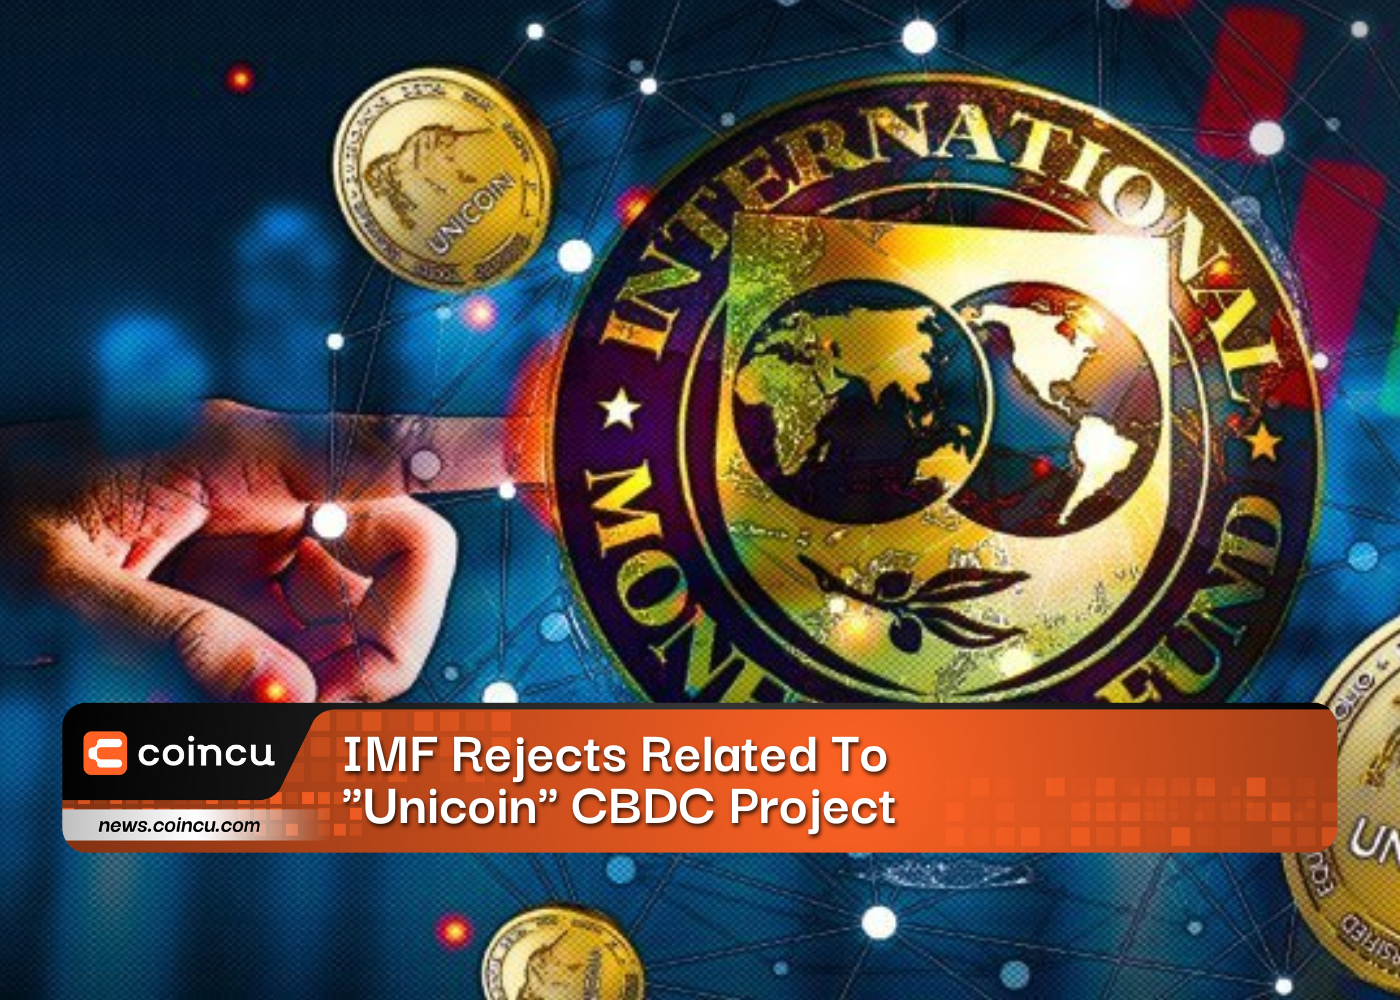 IMF Rejects Related To "Unicoin" CBDC Project